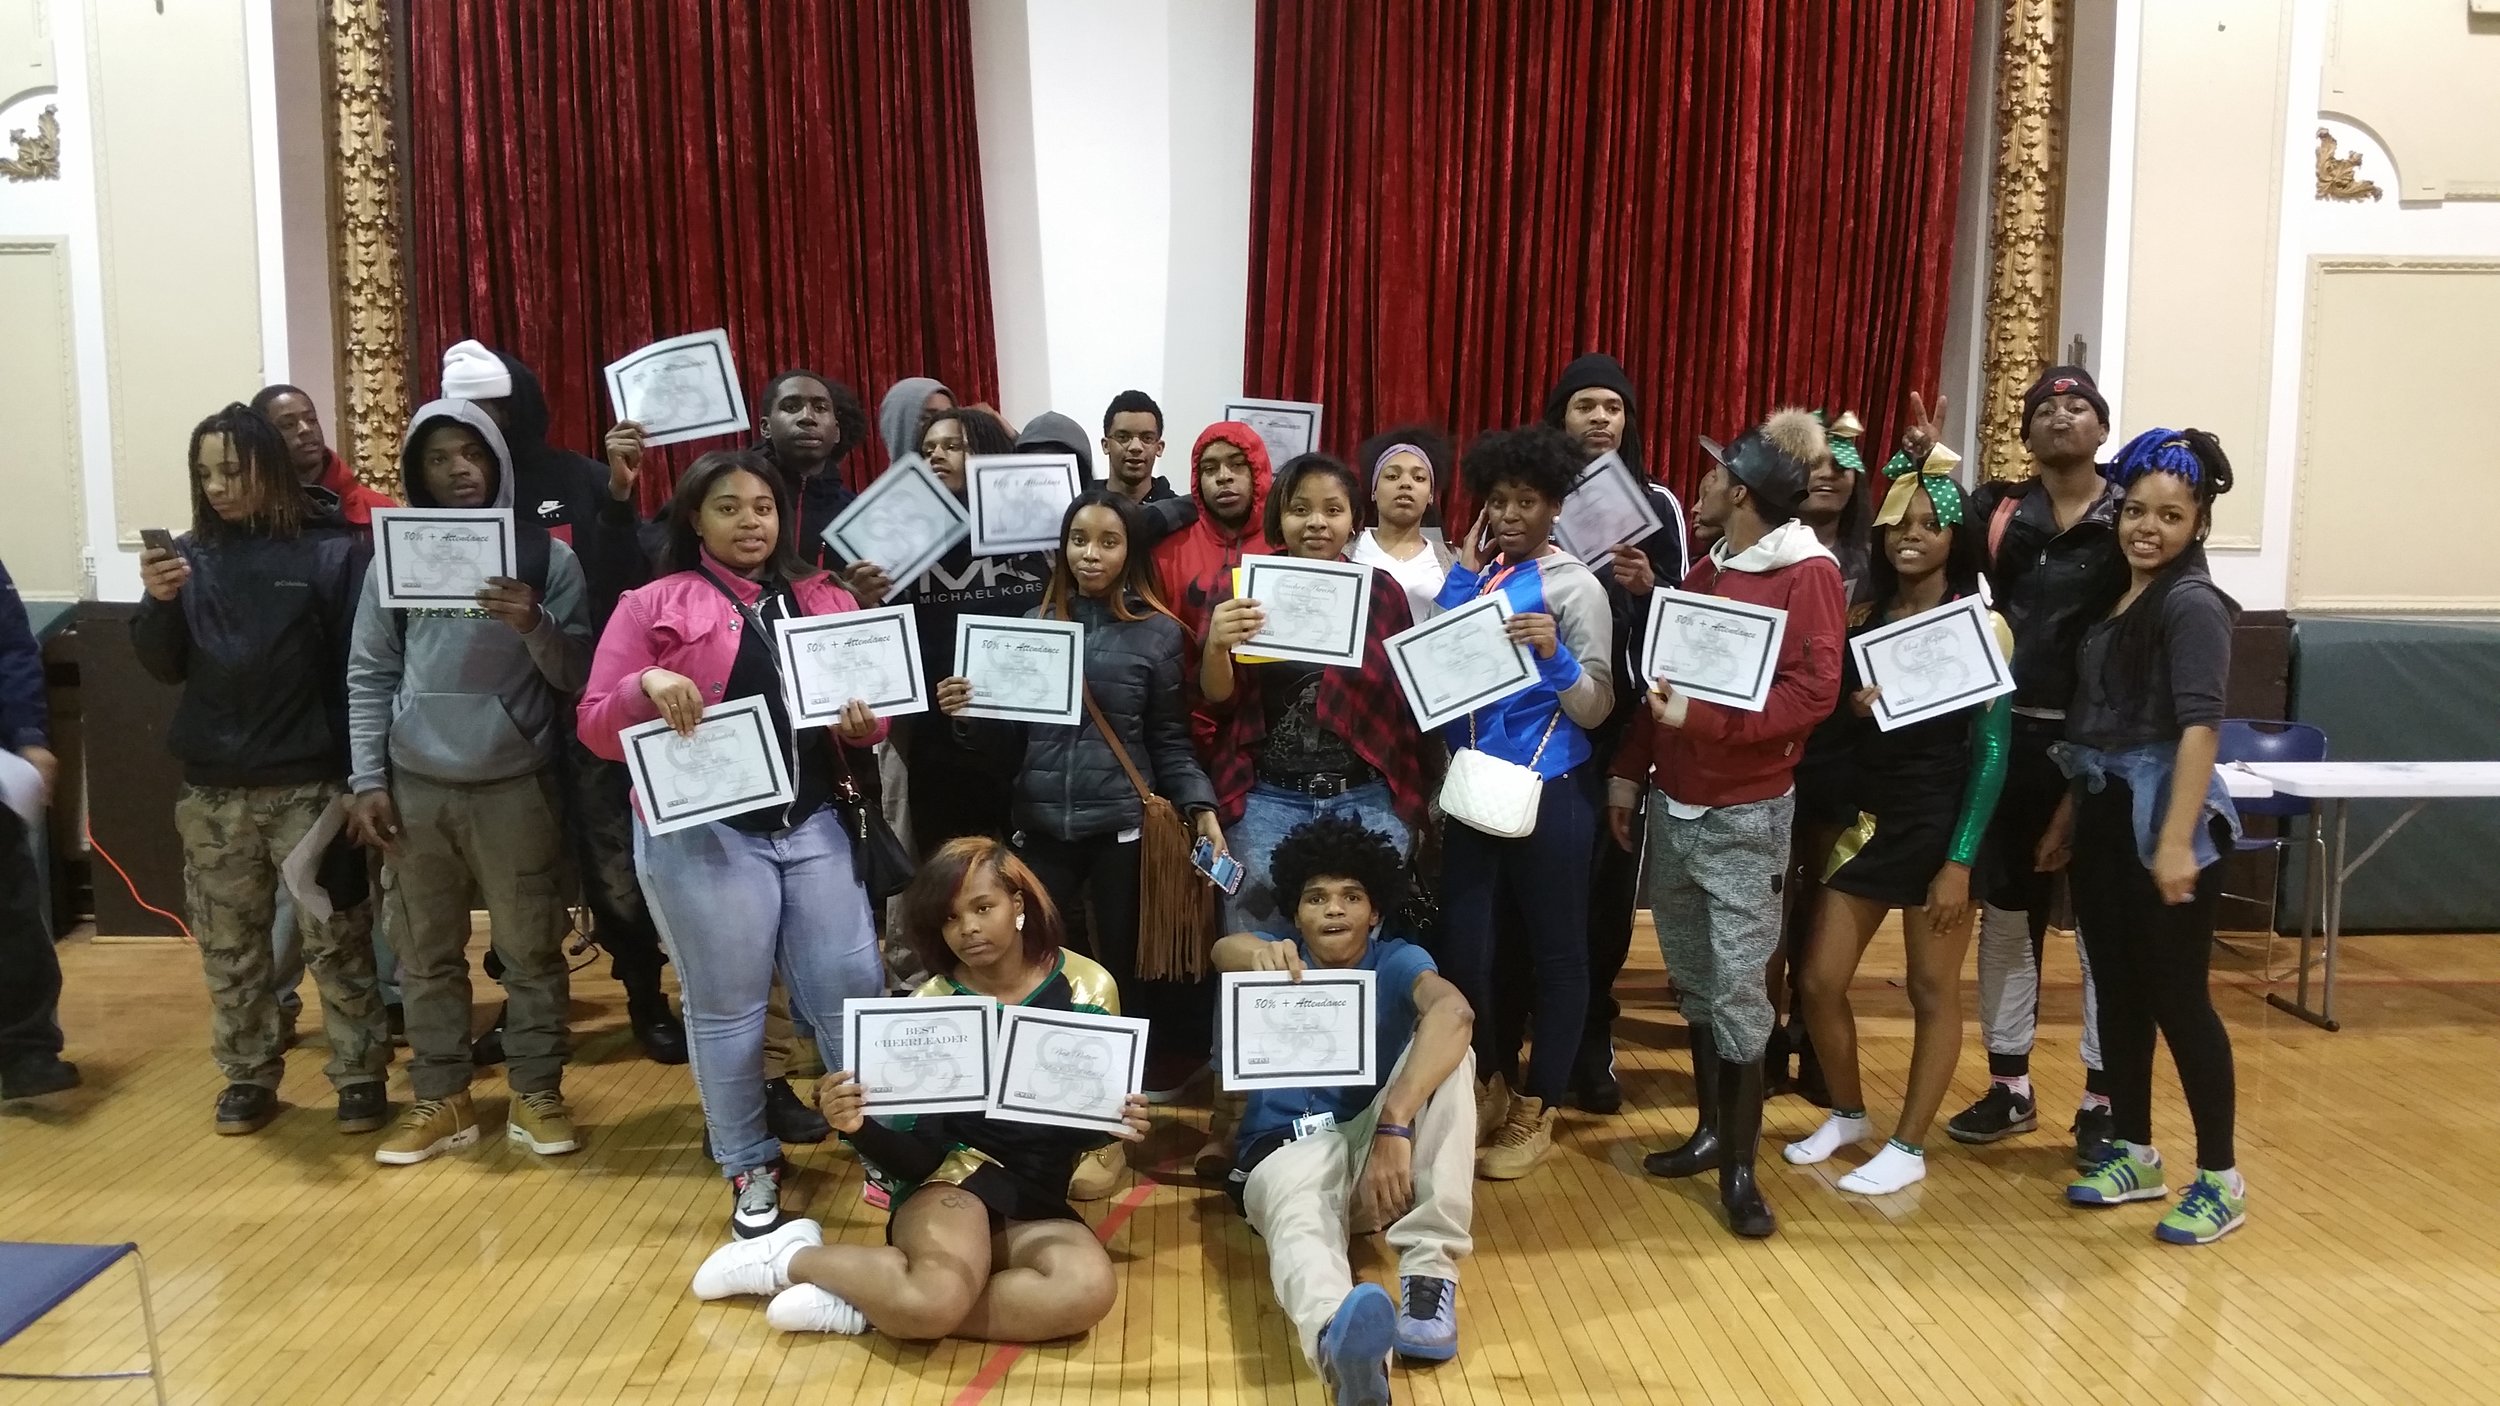  Community Youth Development Institute Students With Certificates 